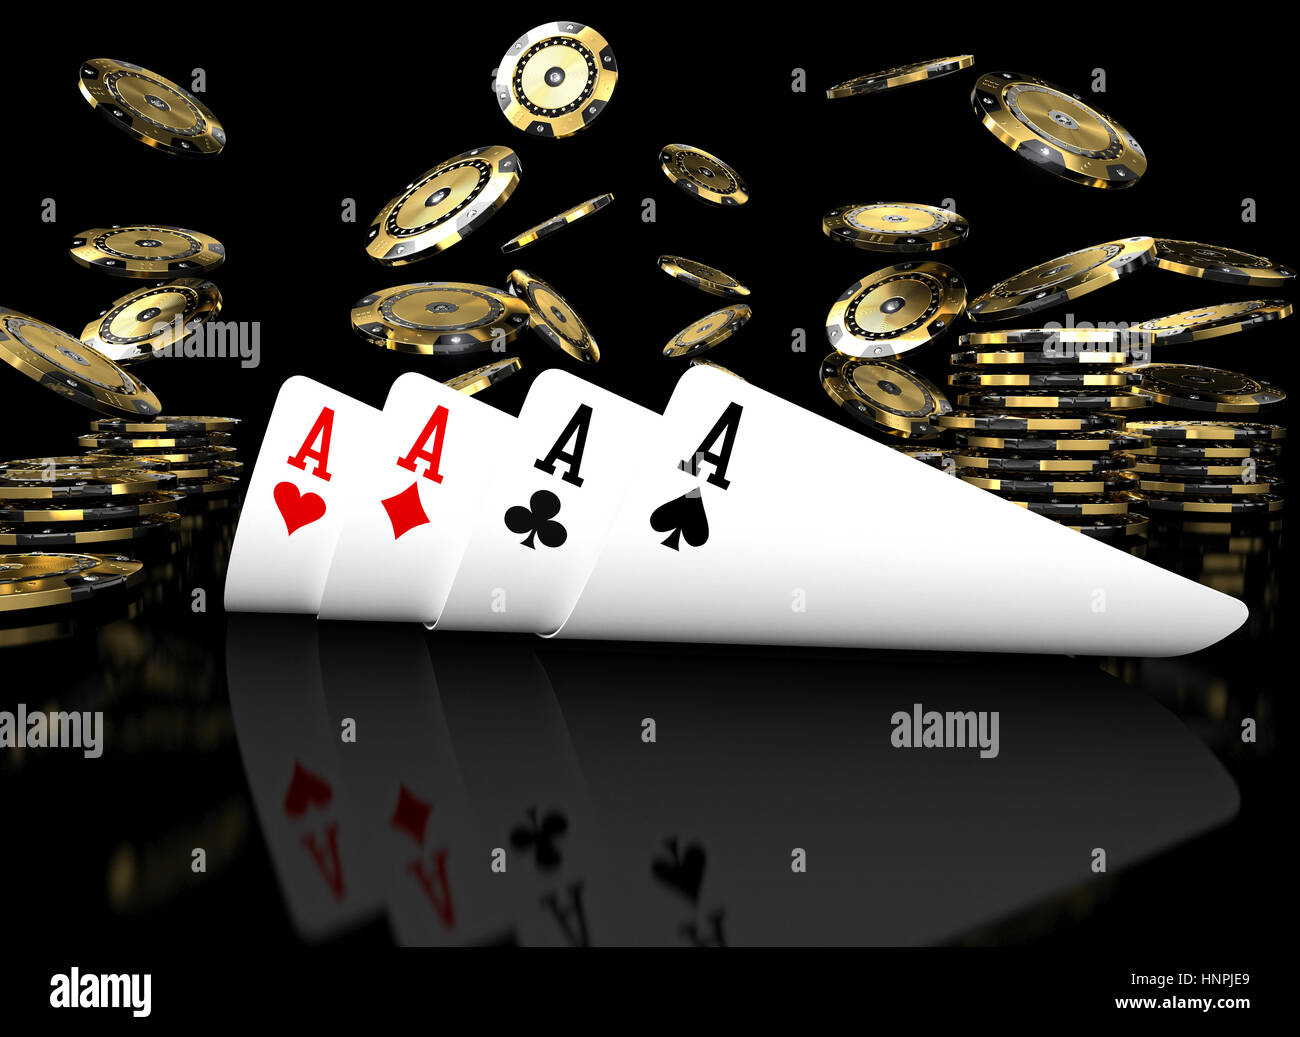 poker card on black table 3d rendering image Stock Photo